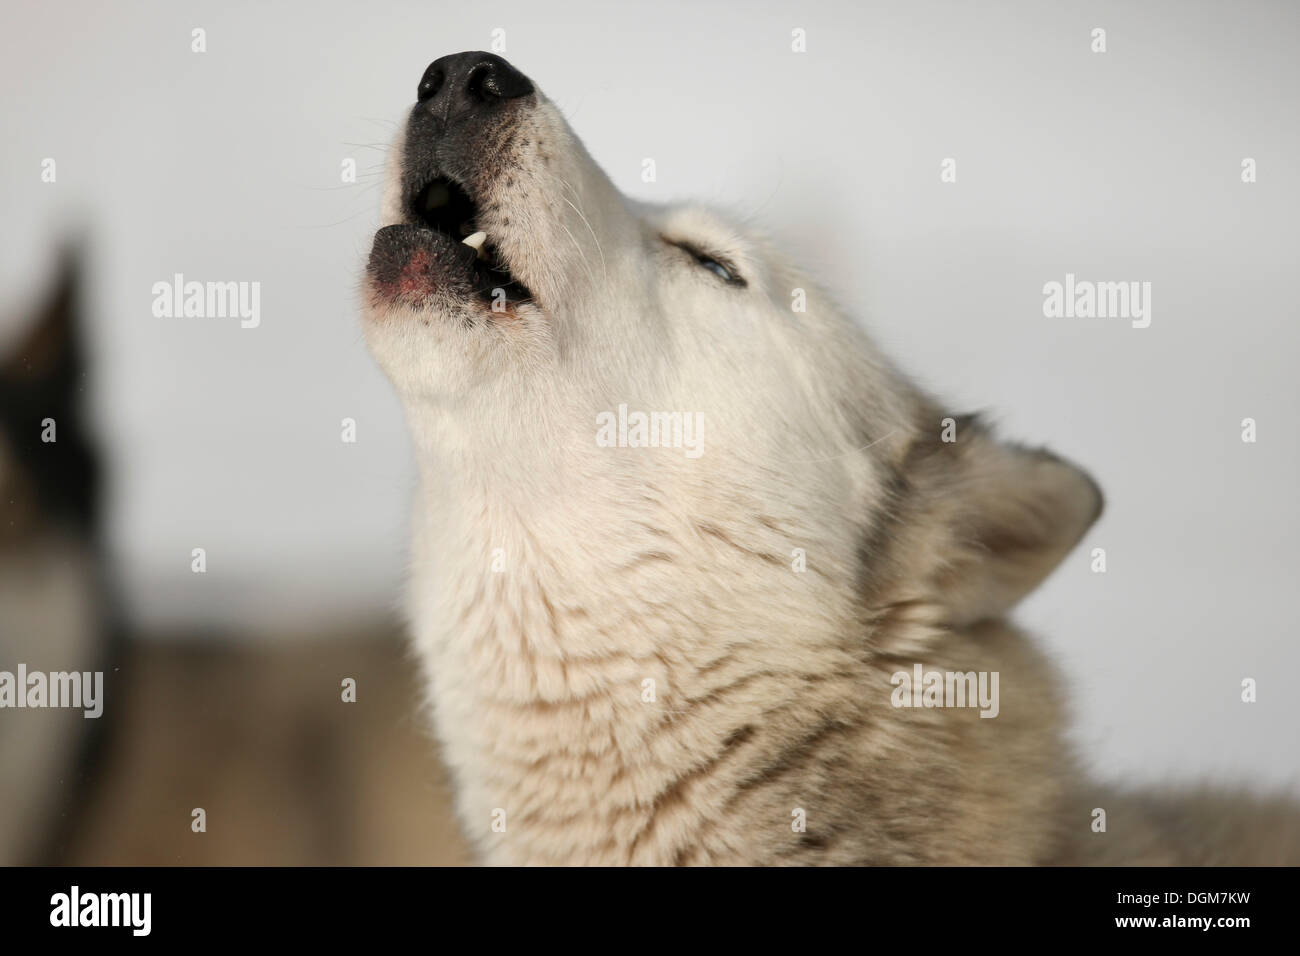 Husky during a sled dog race, howling, portrait Stock Photo